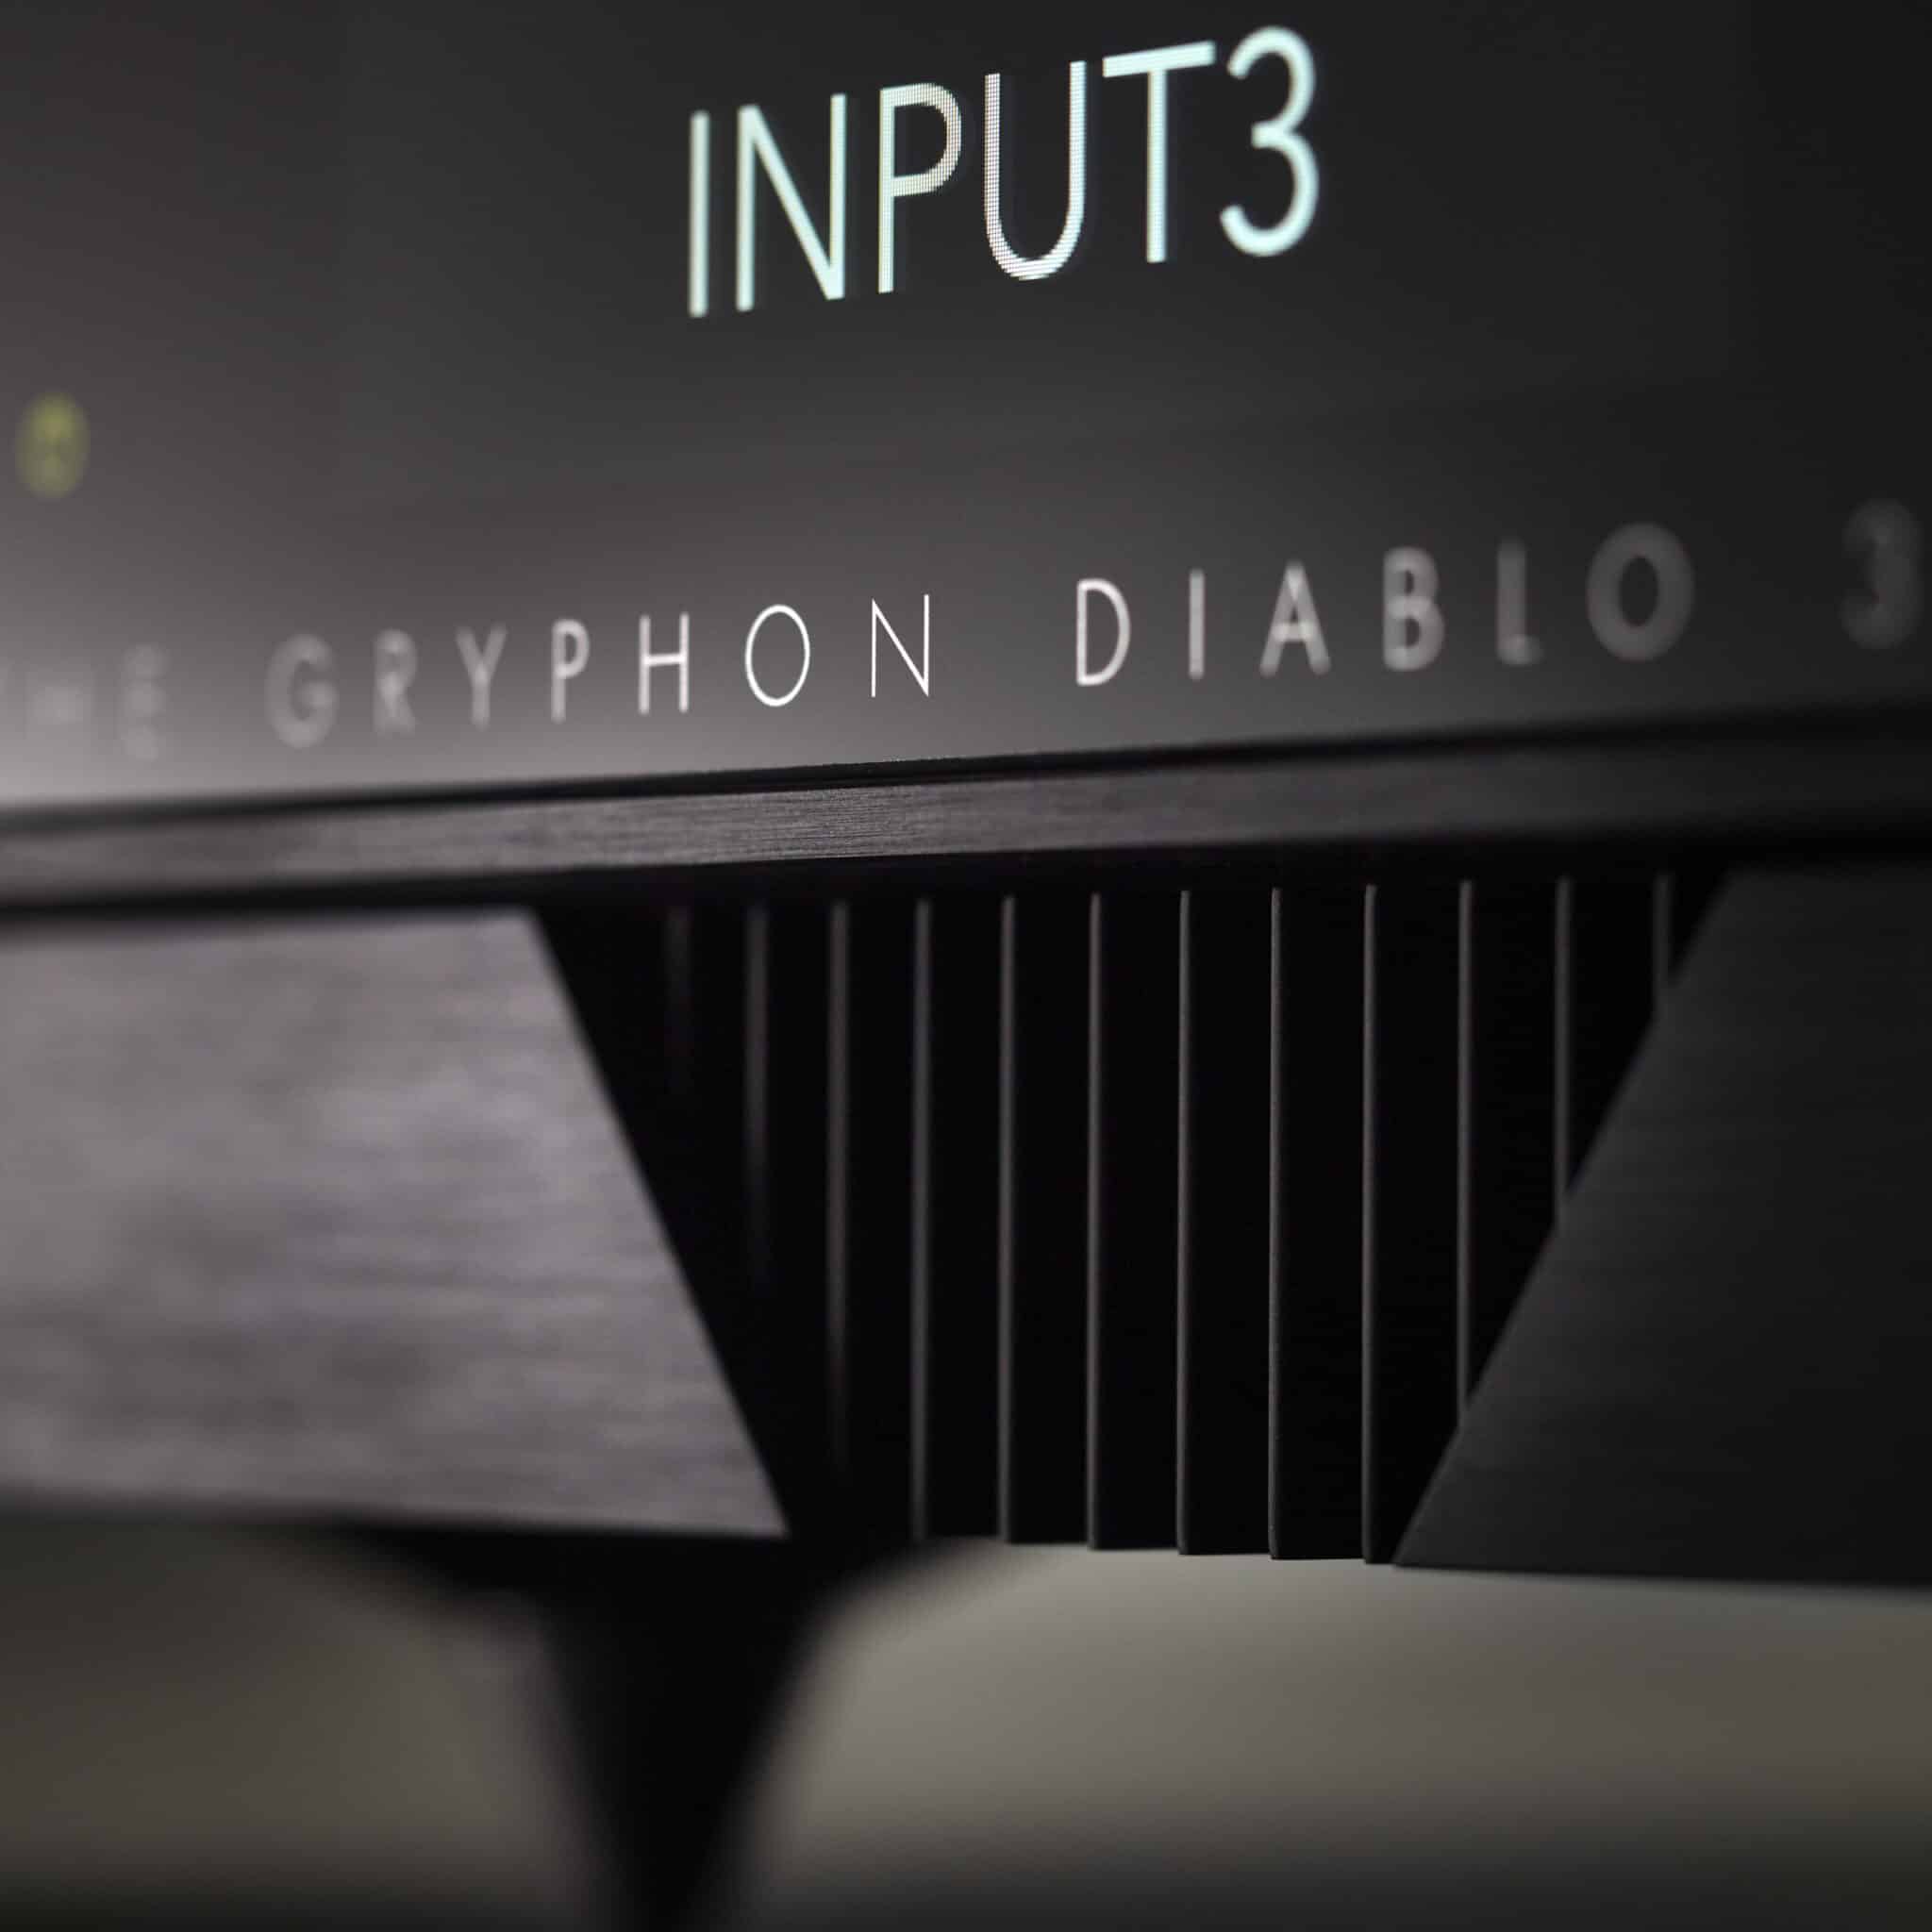 Gryphon Diablo 333 Integrated Amplifier (Email or Call For Availability)